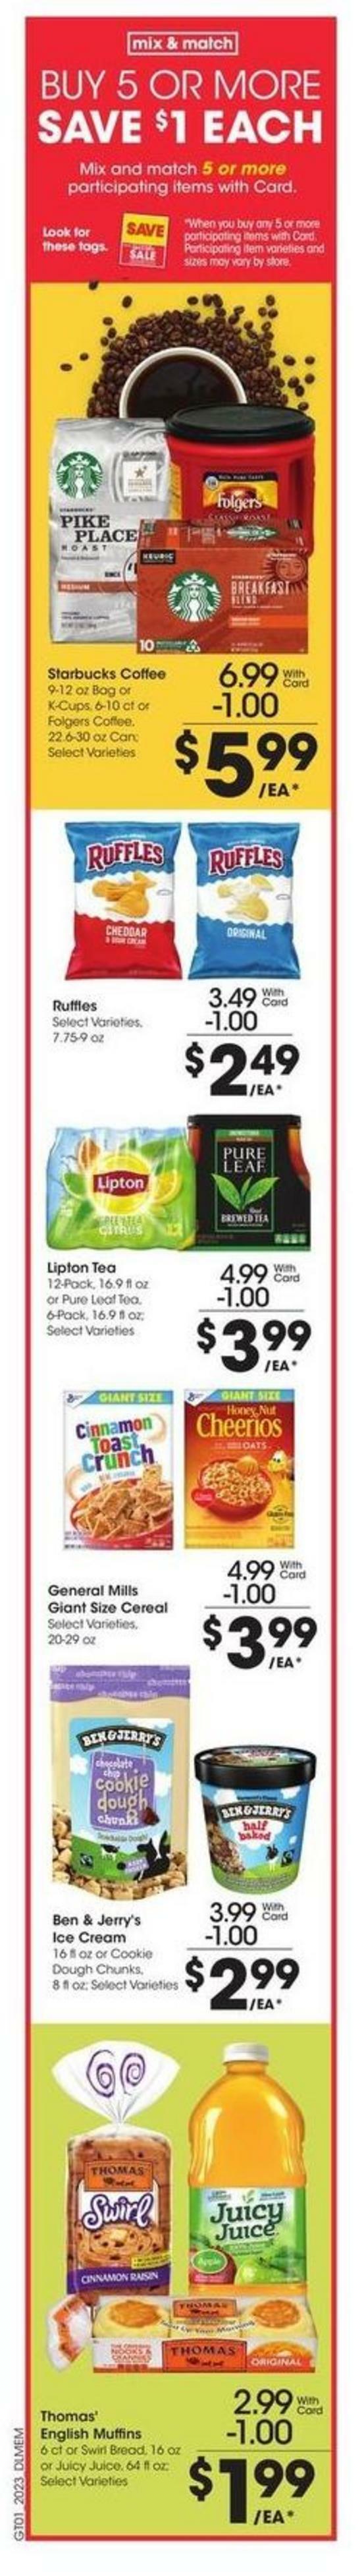 Kroger Weekly Ad from July 8